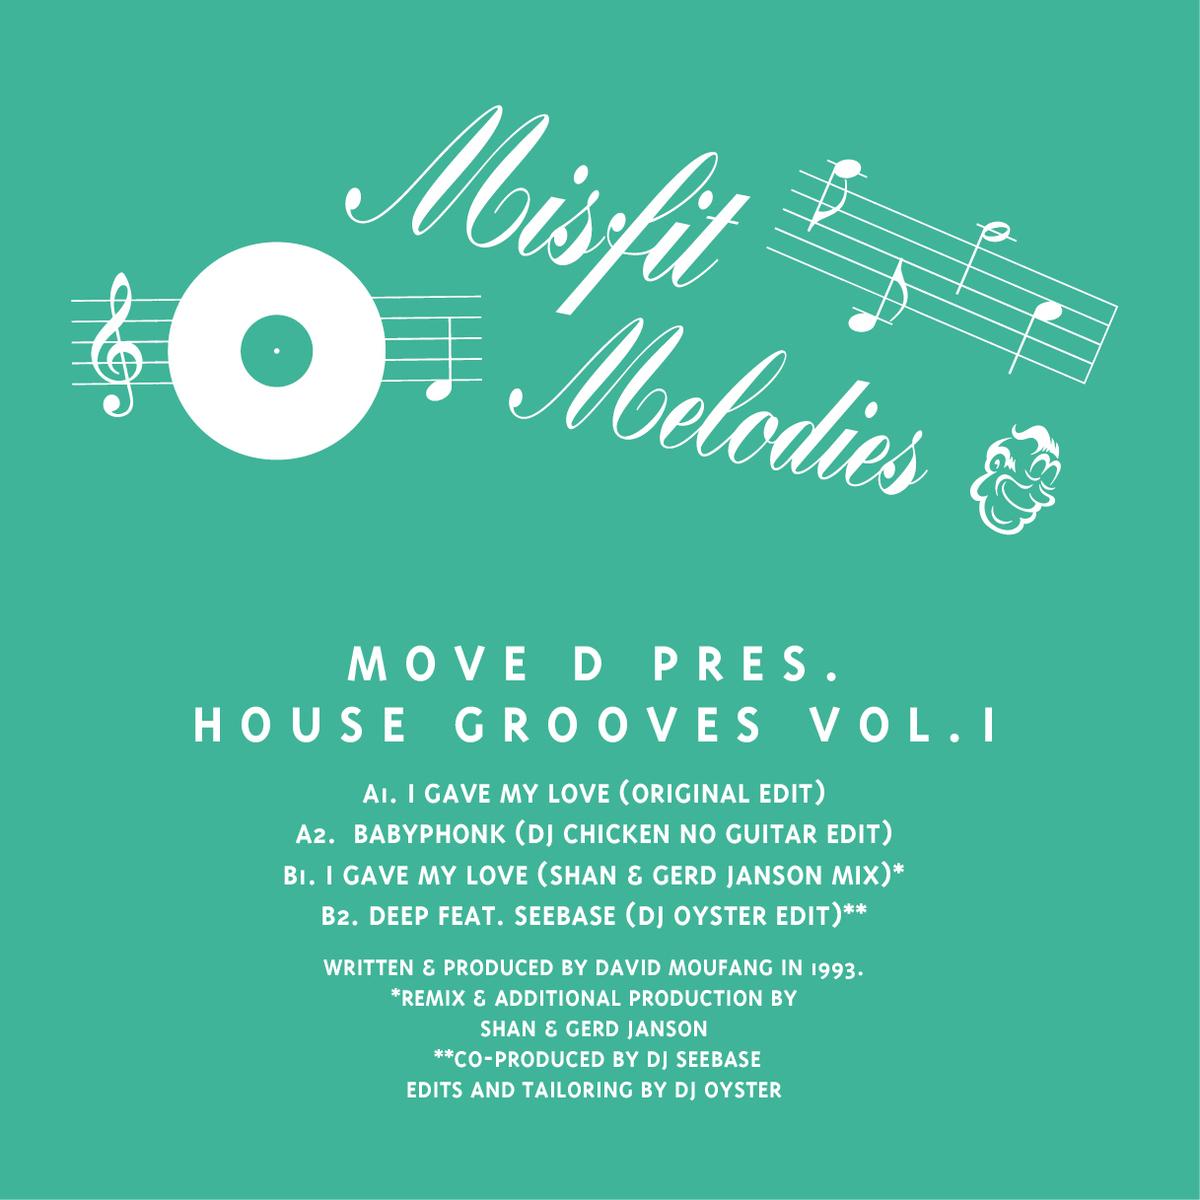 Move D - Presents House Grooves Vol. 1 / MFM03